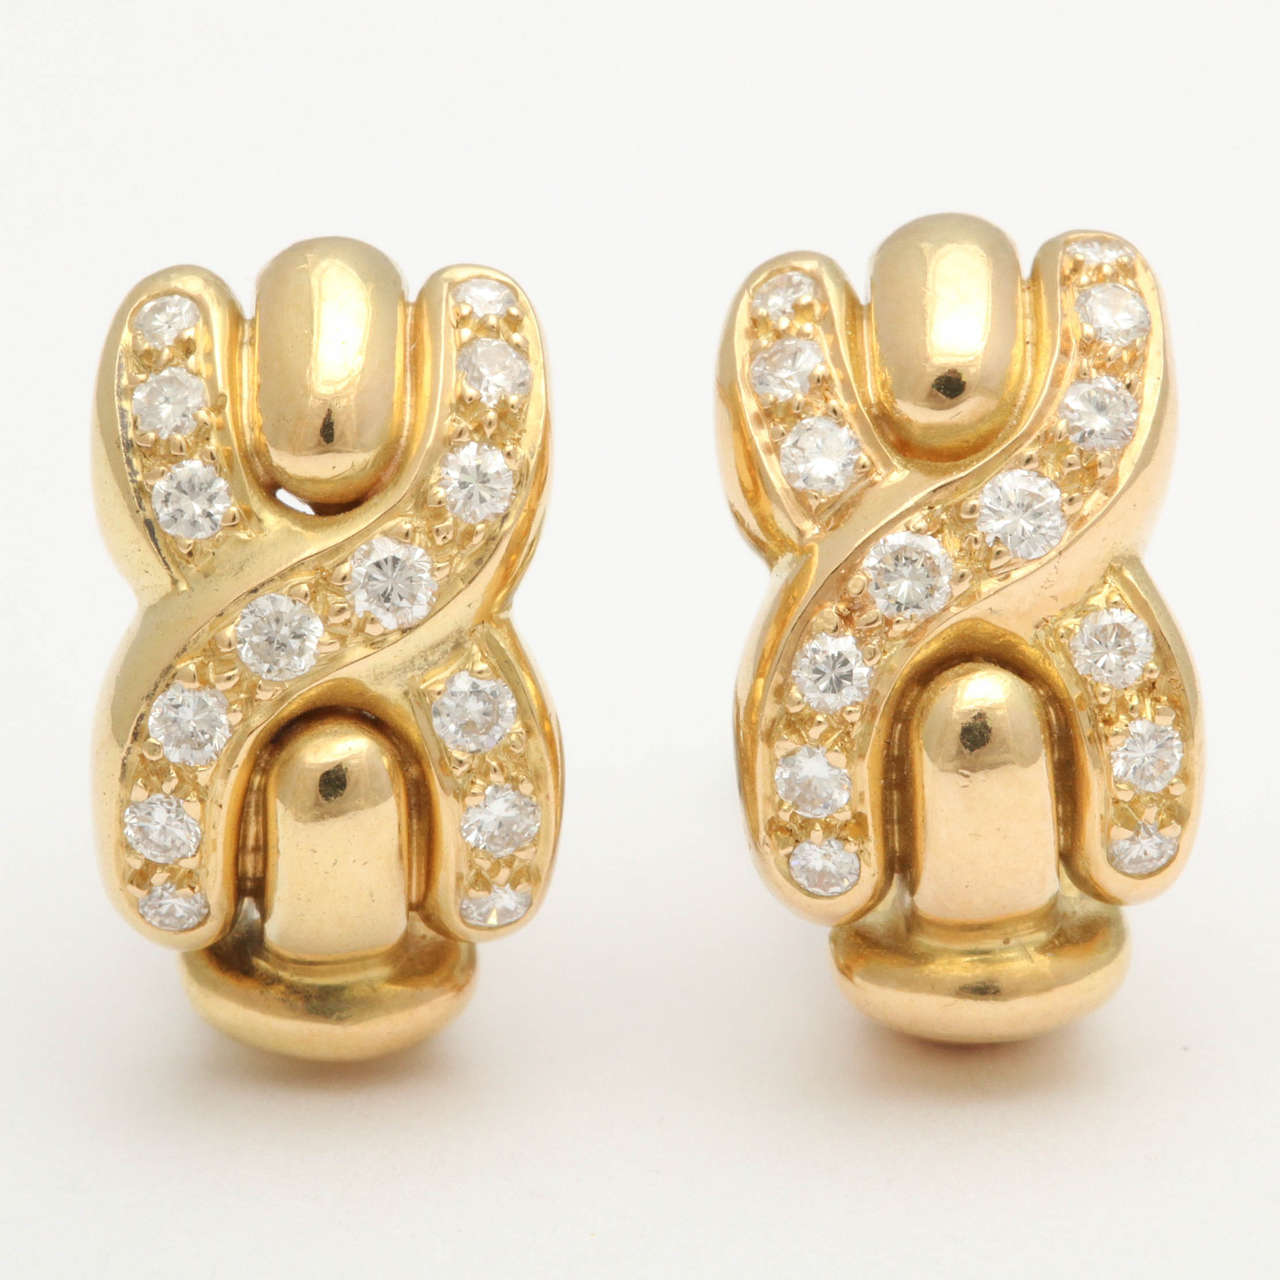 A pair of scintillating 18k gold earrings, each in the form of an X or 